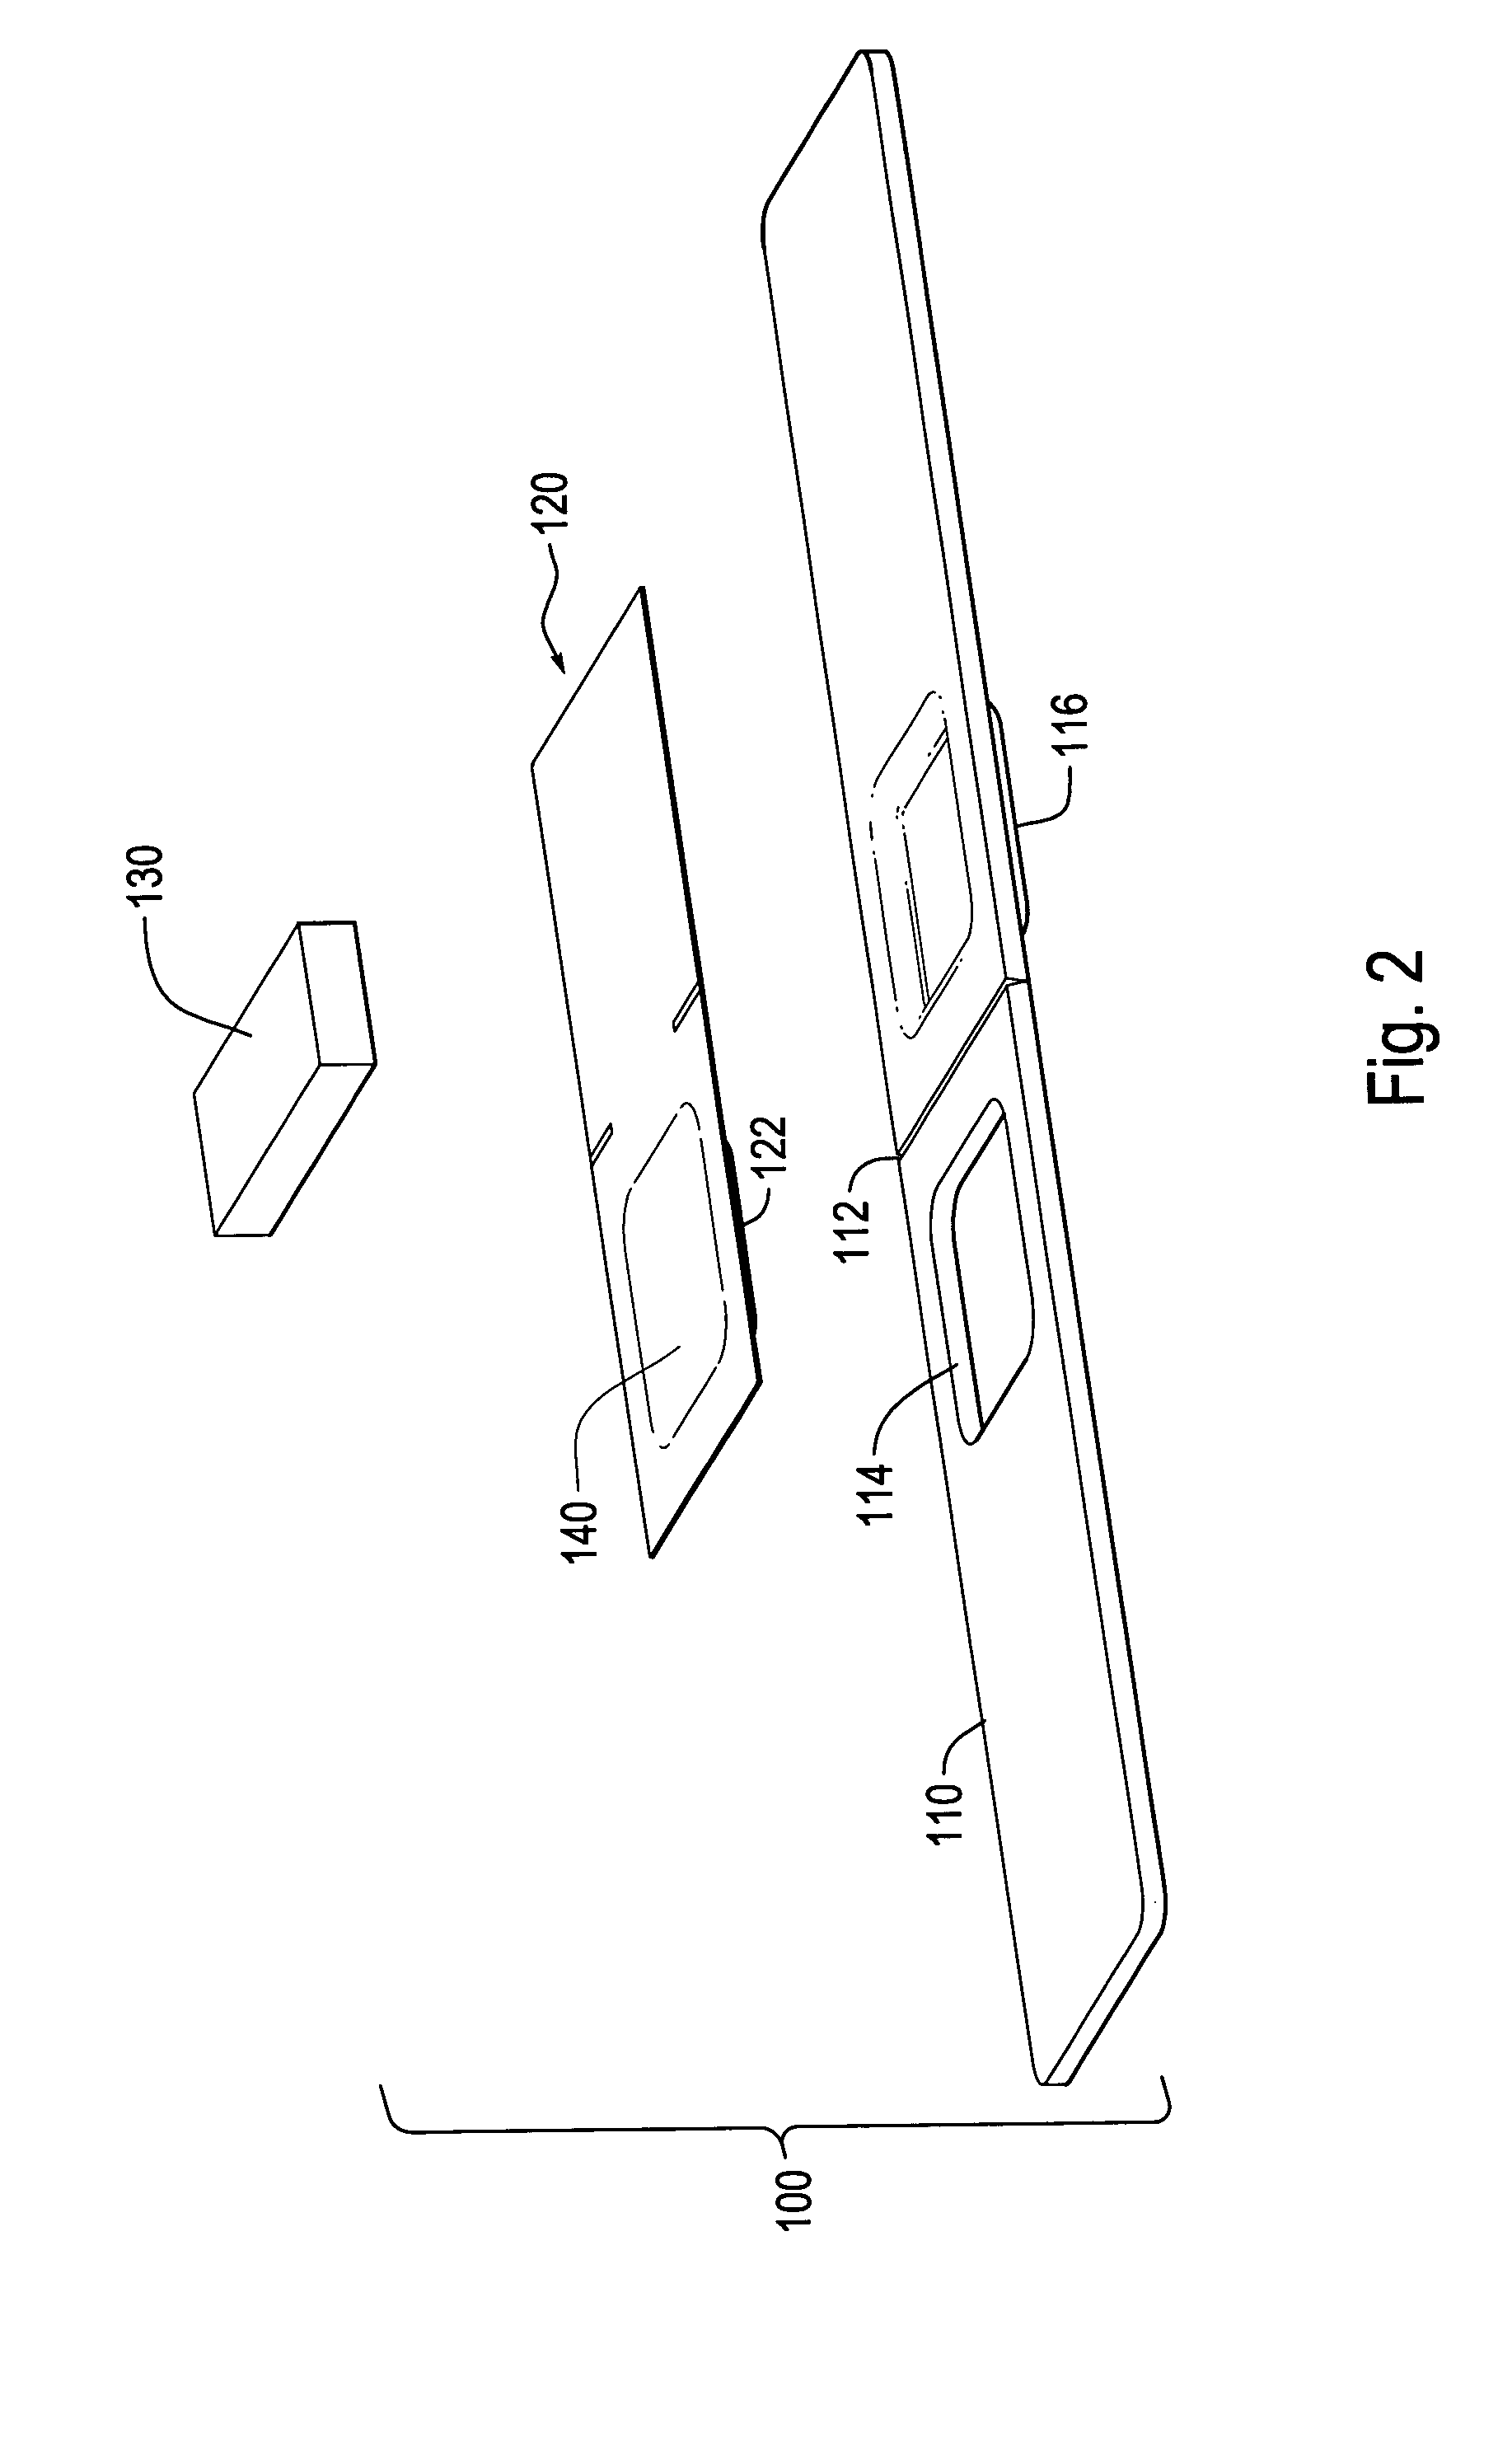 Single-use applicators for adhesive material, packaging systems, methods of use and methods of manufacture